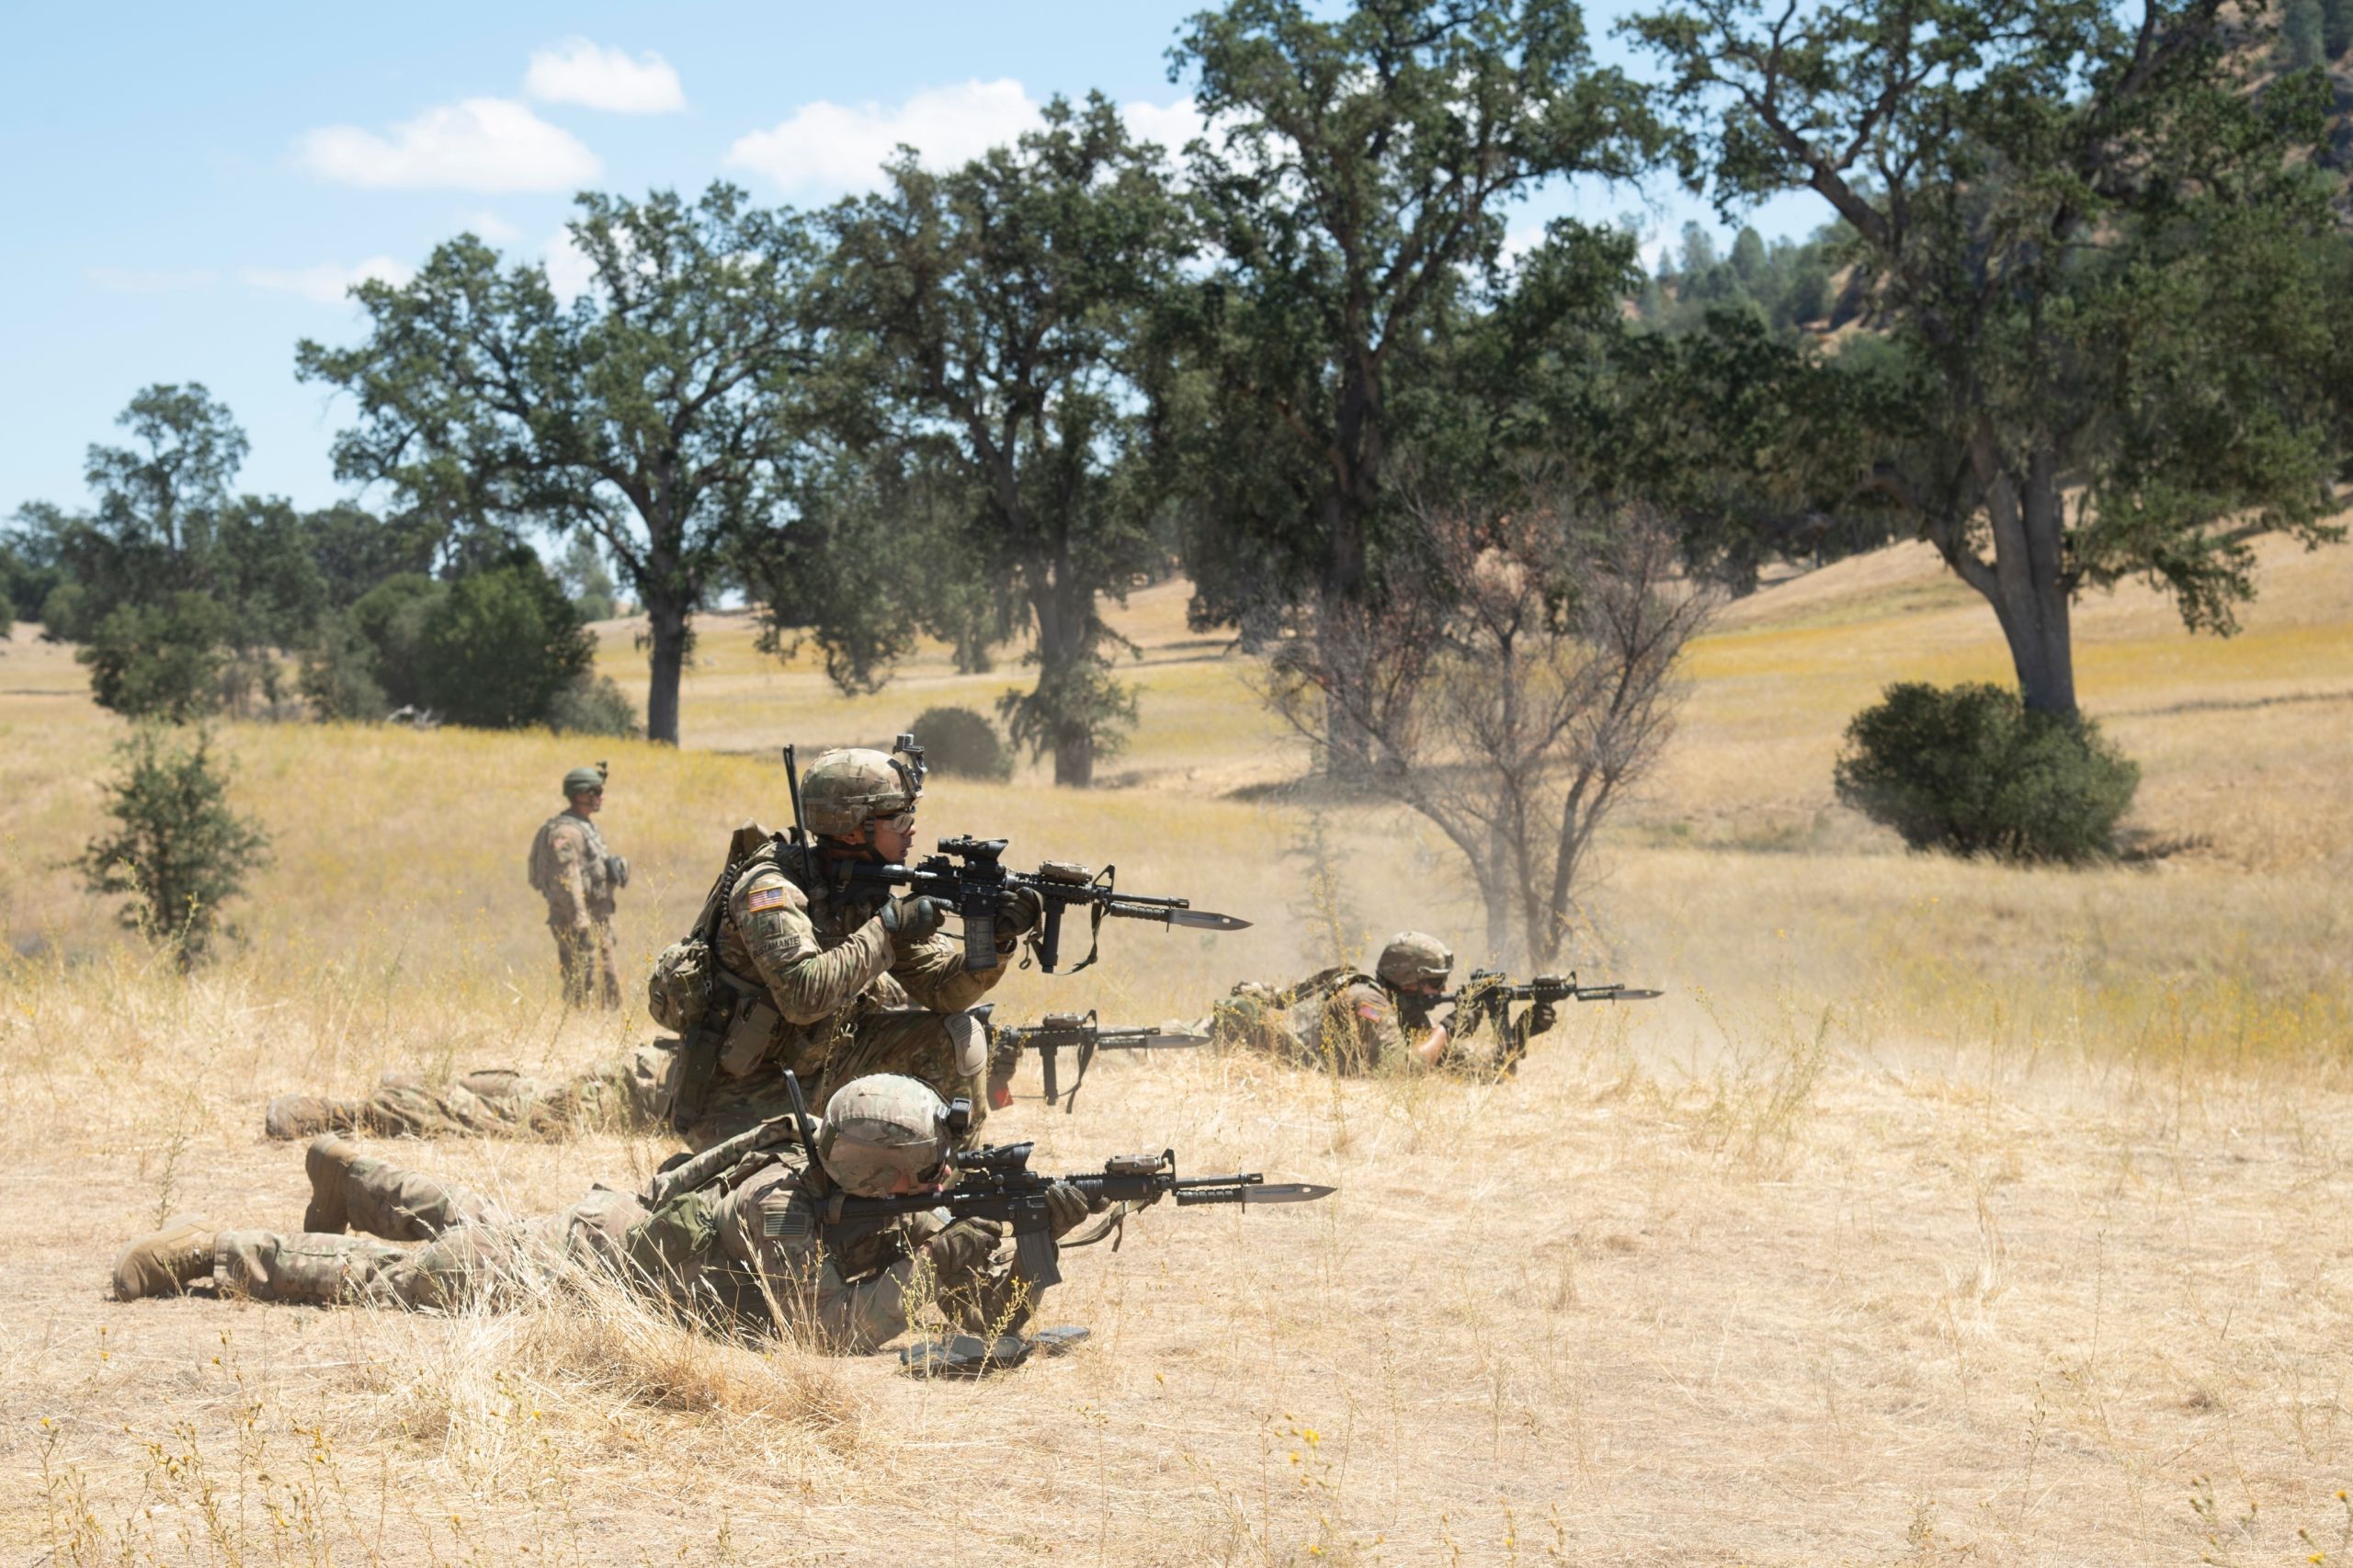 Soldiers shoot rifles in a field during live fire training